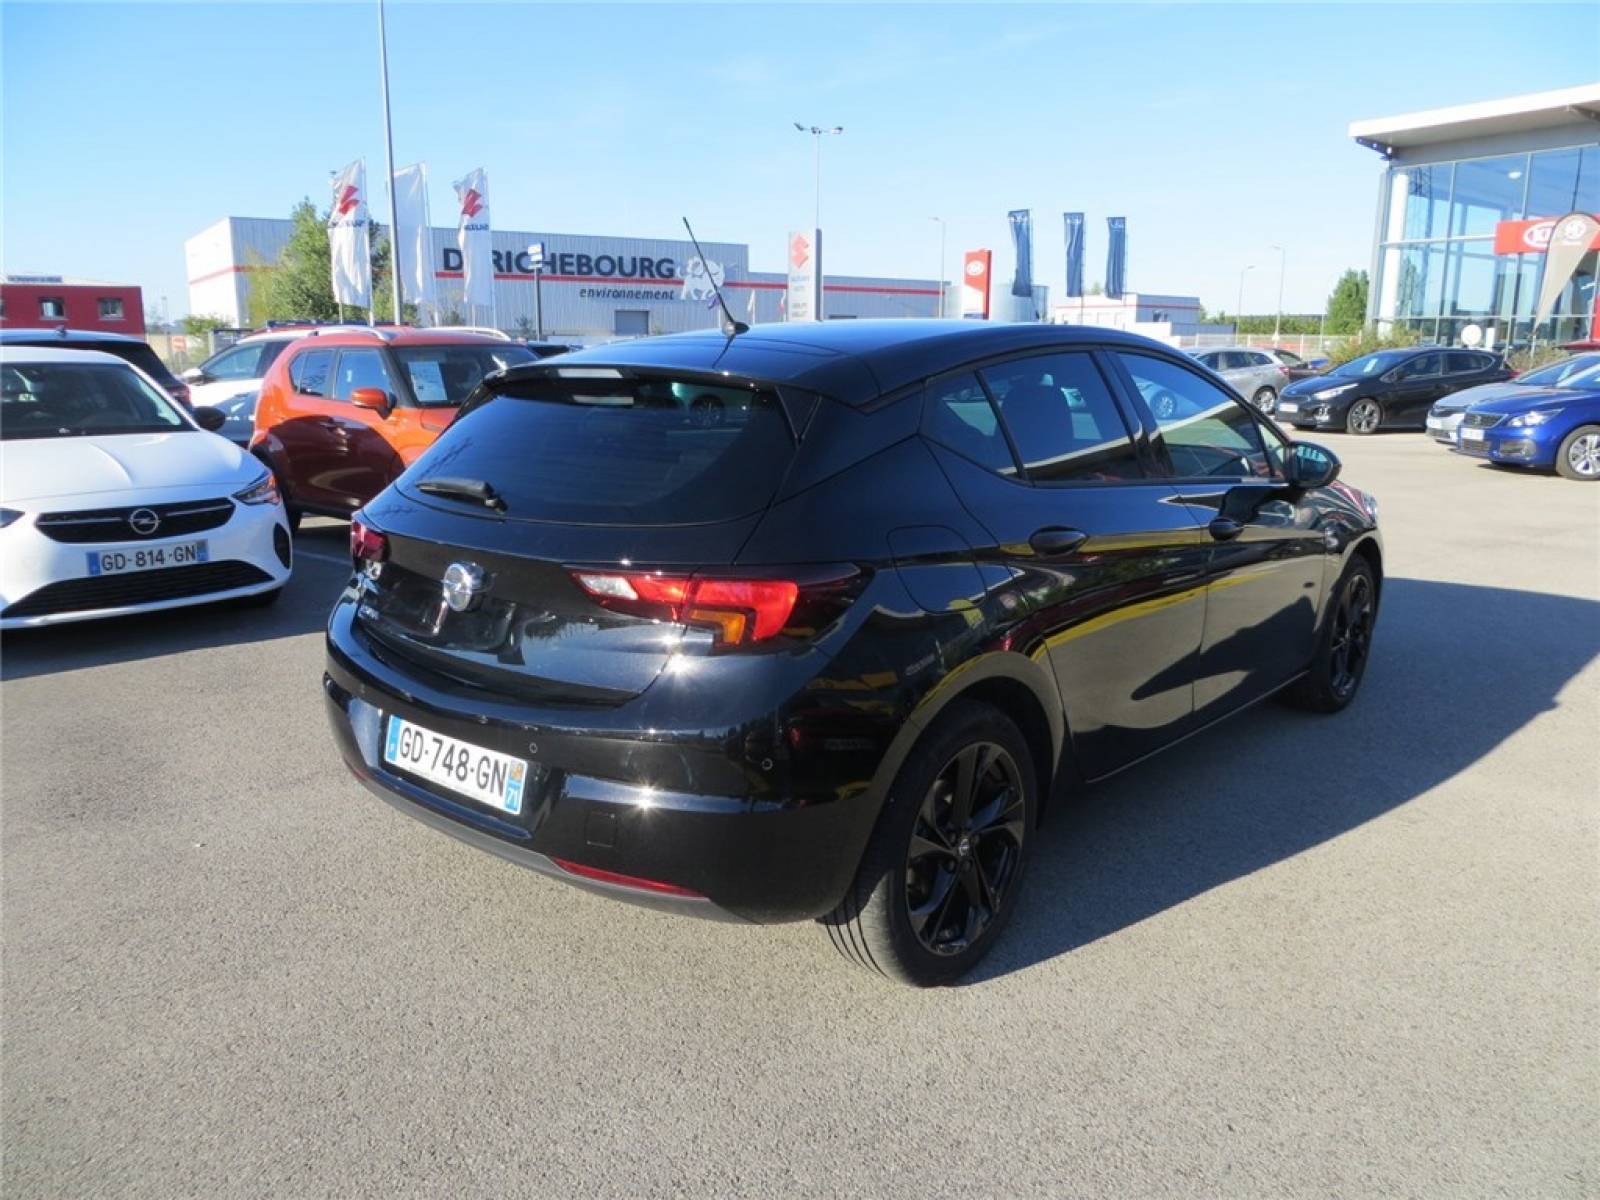 OPEL Astra 1.2 Turbo 130 ch BVM6 - véhicule d'occasion - Groupe Guillet - Opel Magicauto - Chalon-sur-Saône - 71380 - Saint-Marcel - 11